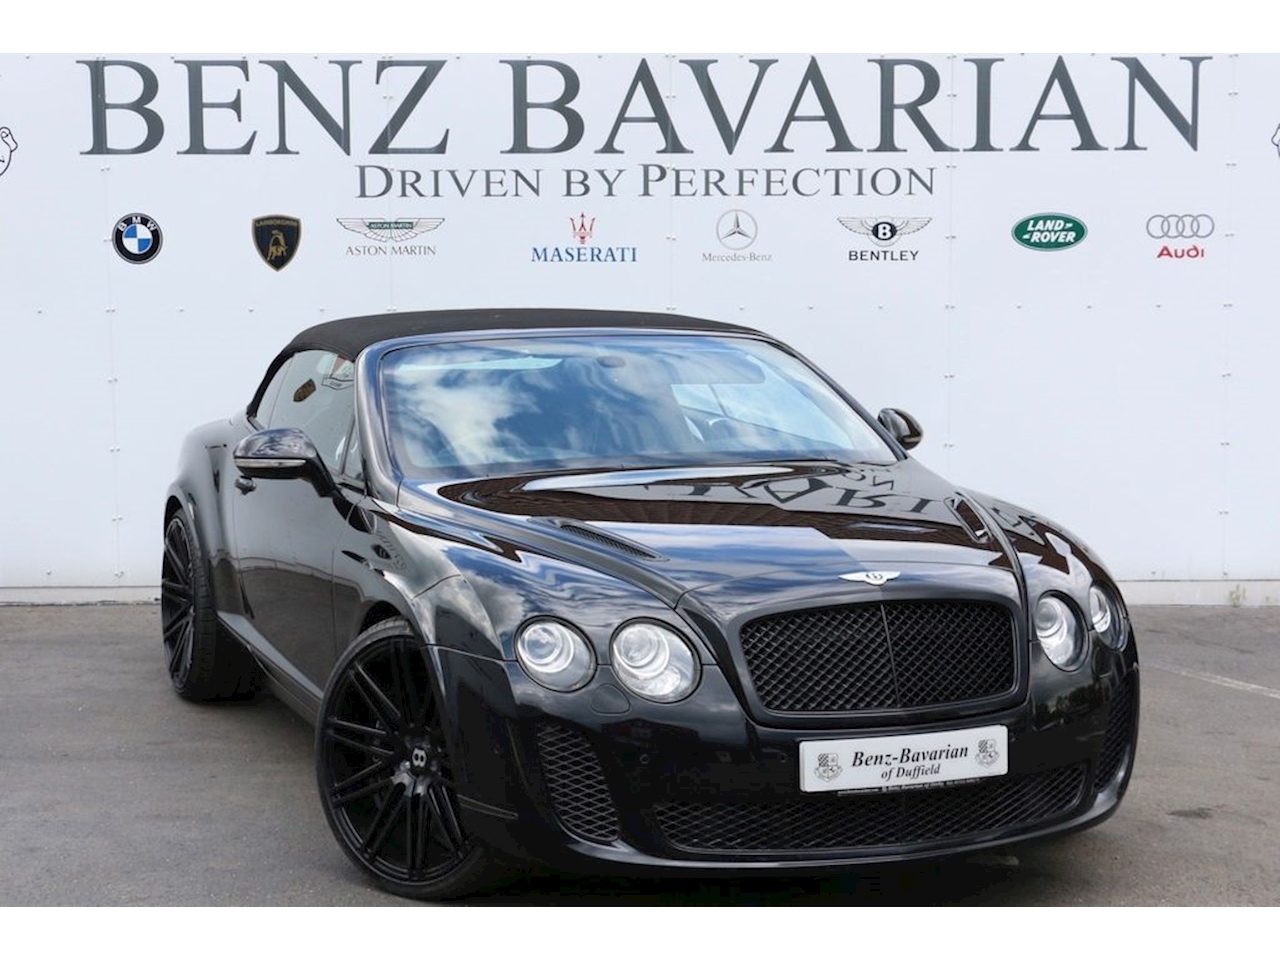 6.0 GT Supersports Convertible 2dr Petrol Automatic (388 g/km, 621 bhp)